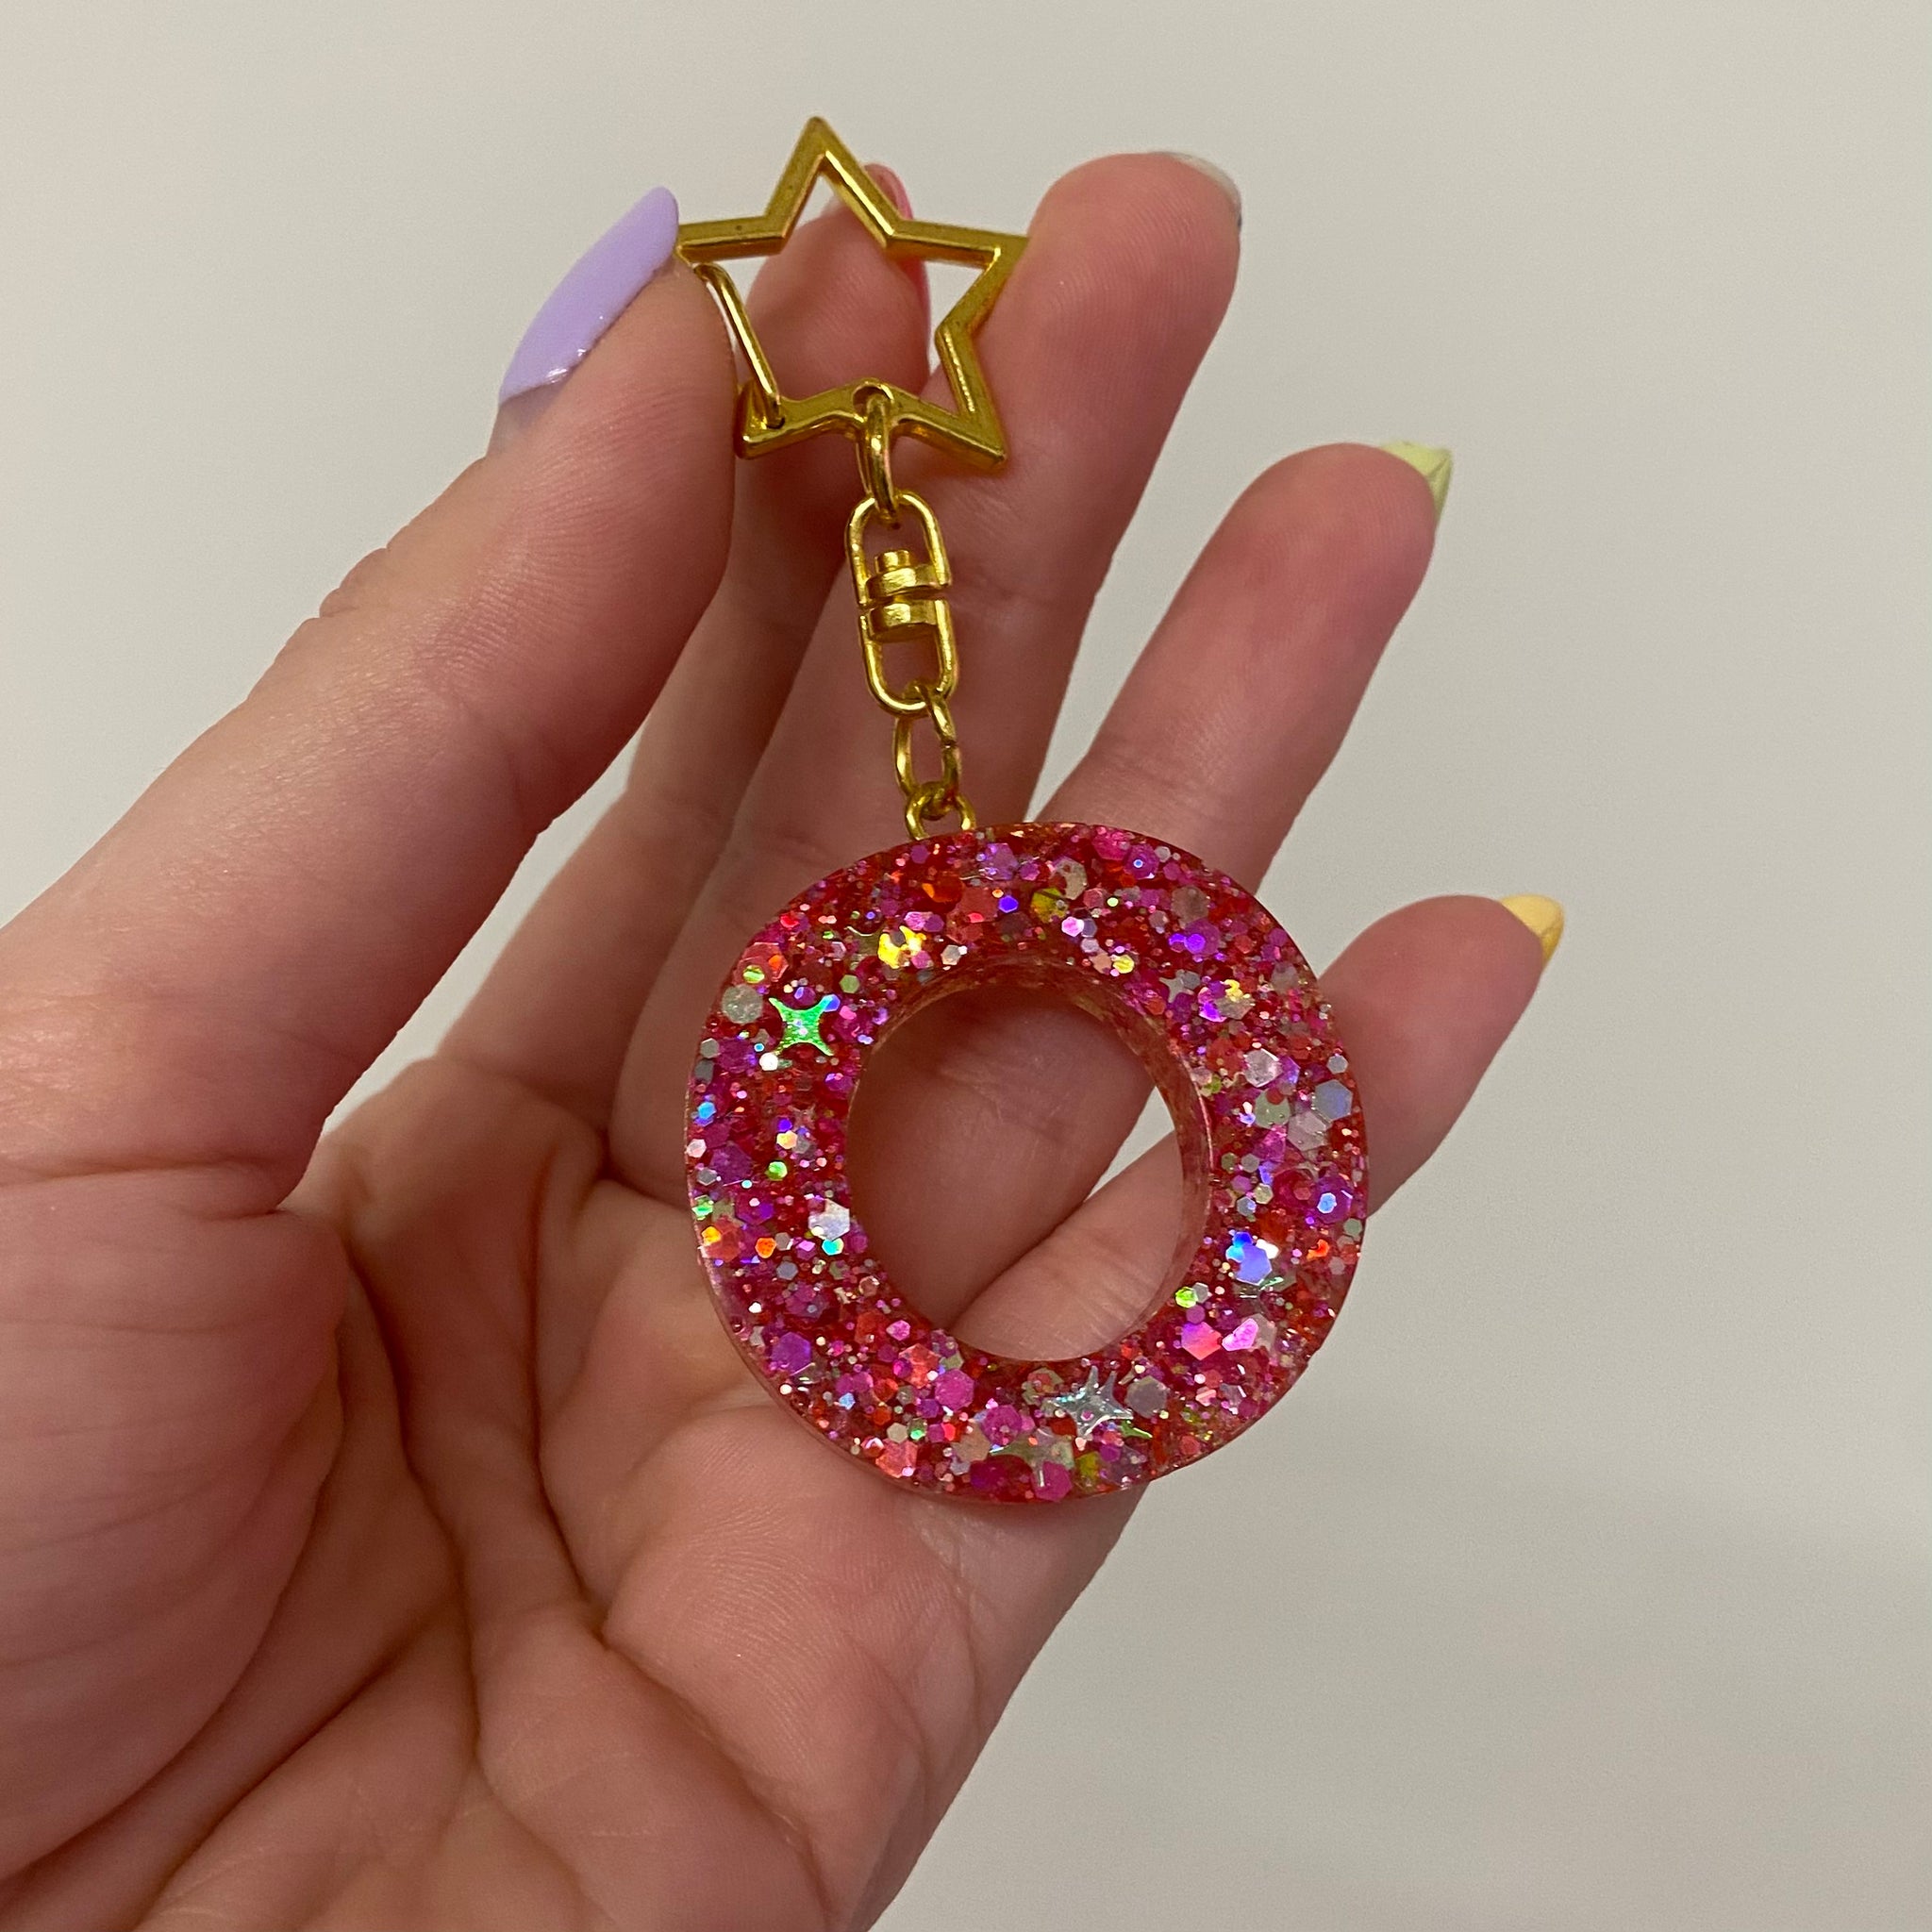 Hot Pink "O" With Star Chain